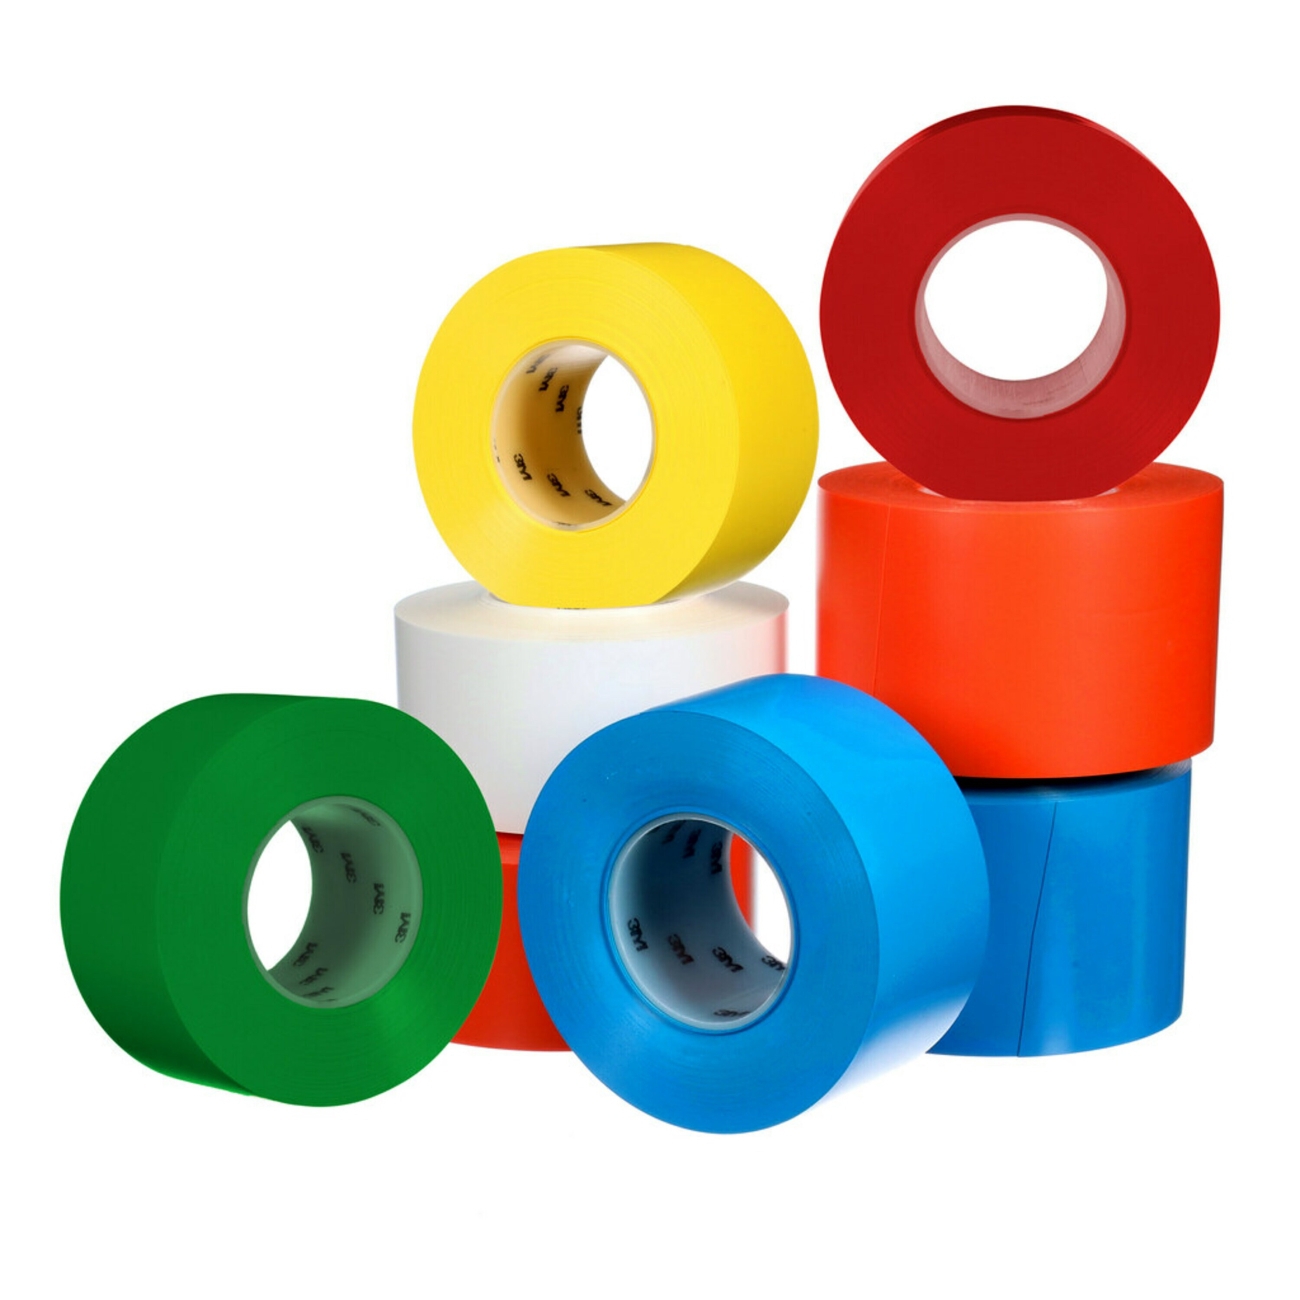 3M extra strong floor marking tape 971, yellow, 76.2mm x 32.9m, 0.43mm